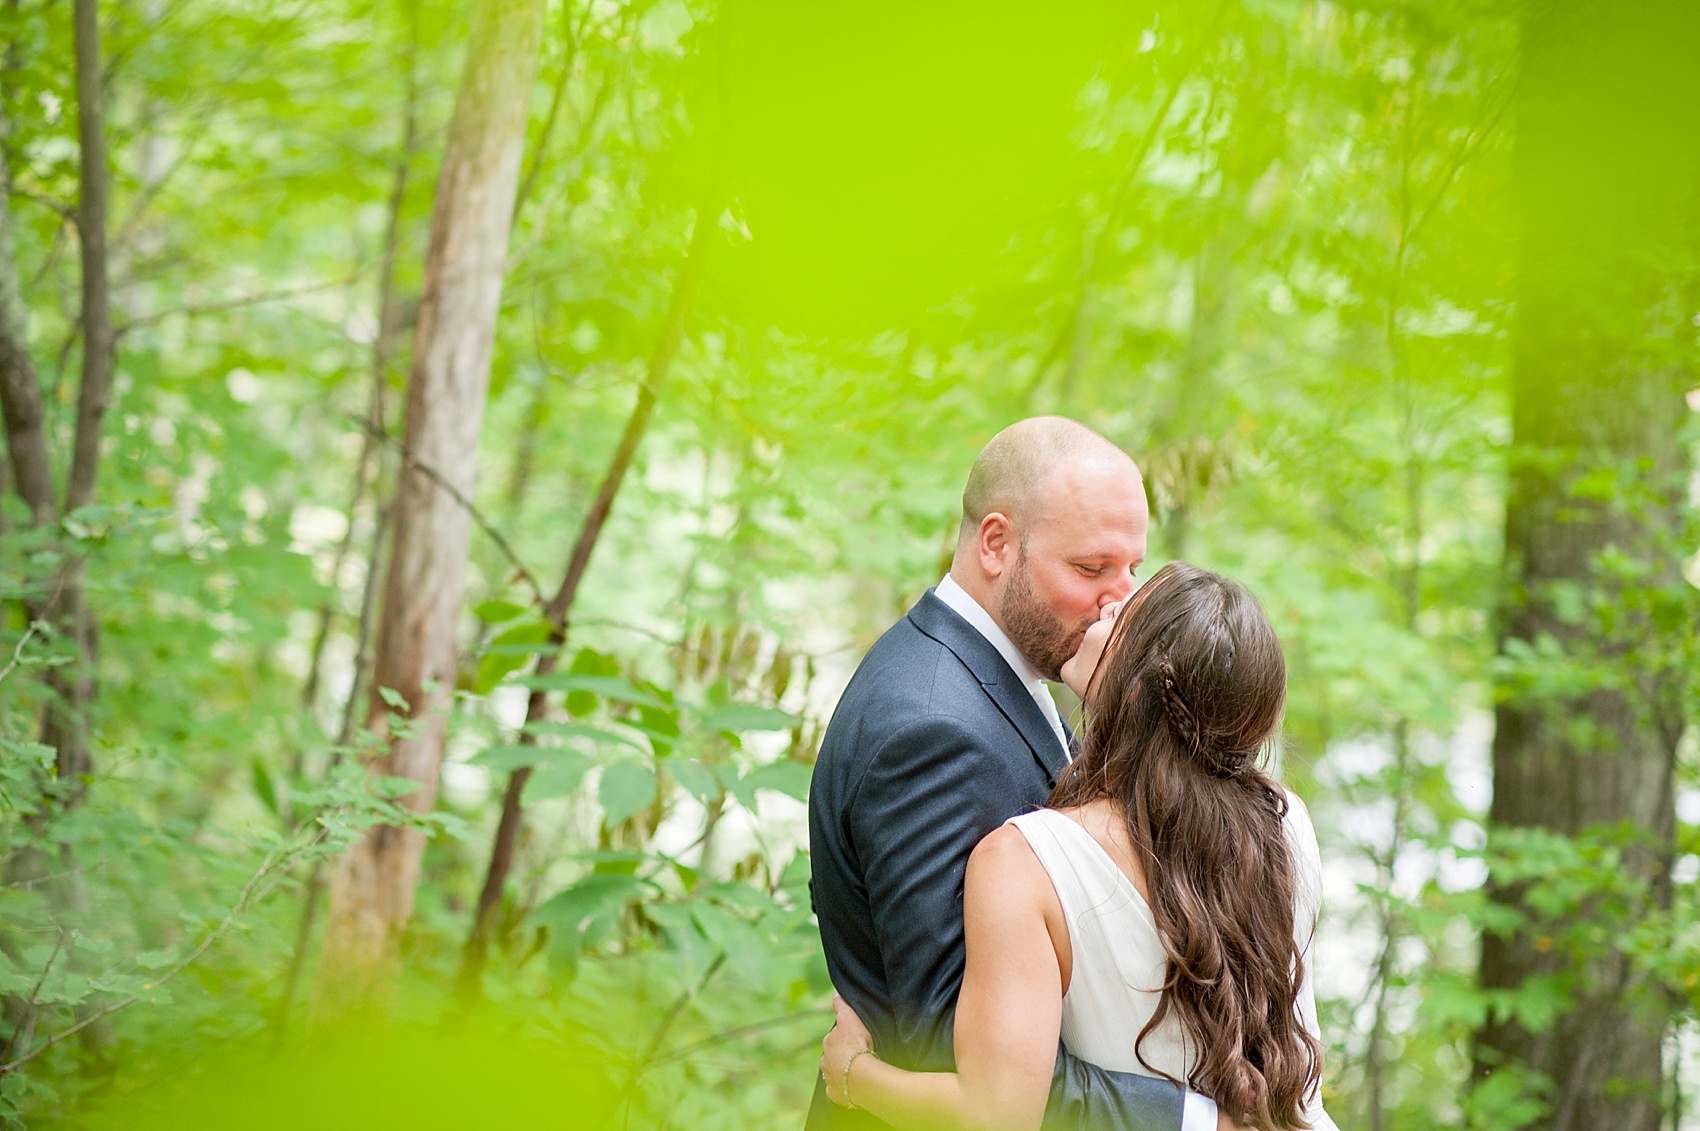 Bride and groom forest photos at their rustic Massachusetts Berkshires wedding at Camp Wa Wa Segowea. Photos by Mikkel Paige Photography, destination wedding photographer.